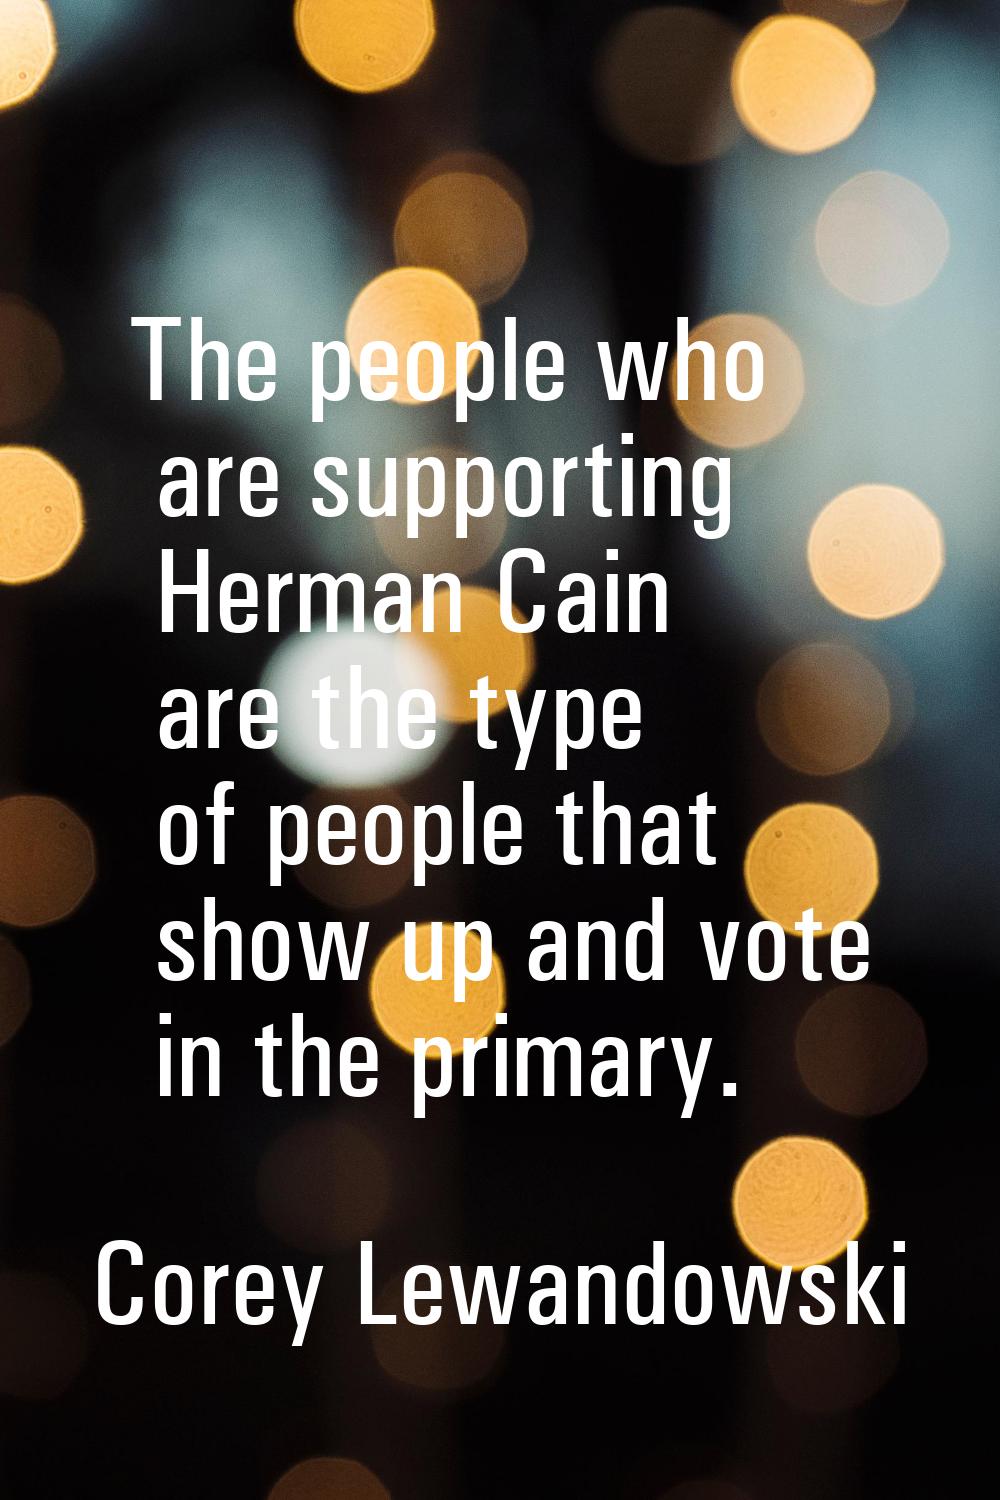 The people who are supporting Herman Cain are the type of people that show up and vote in the prima